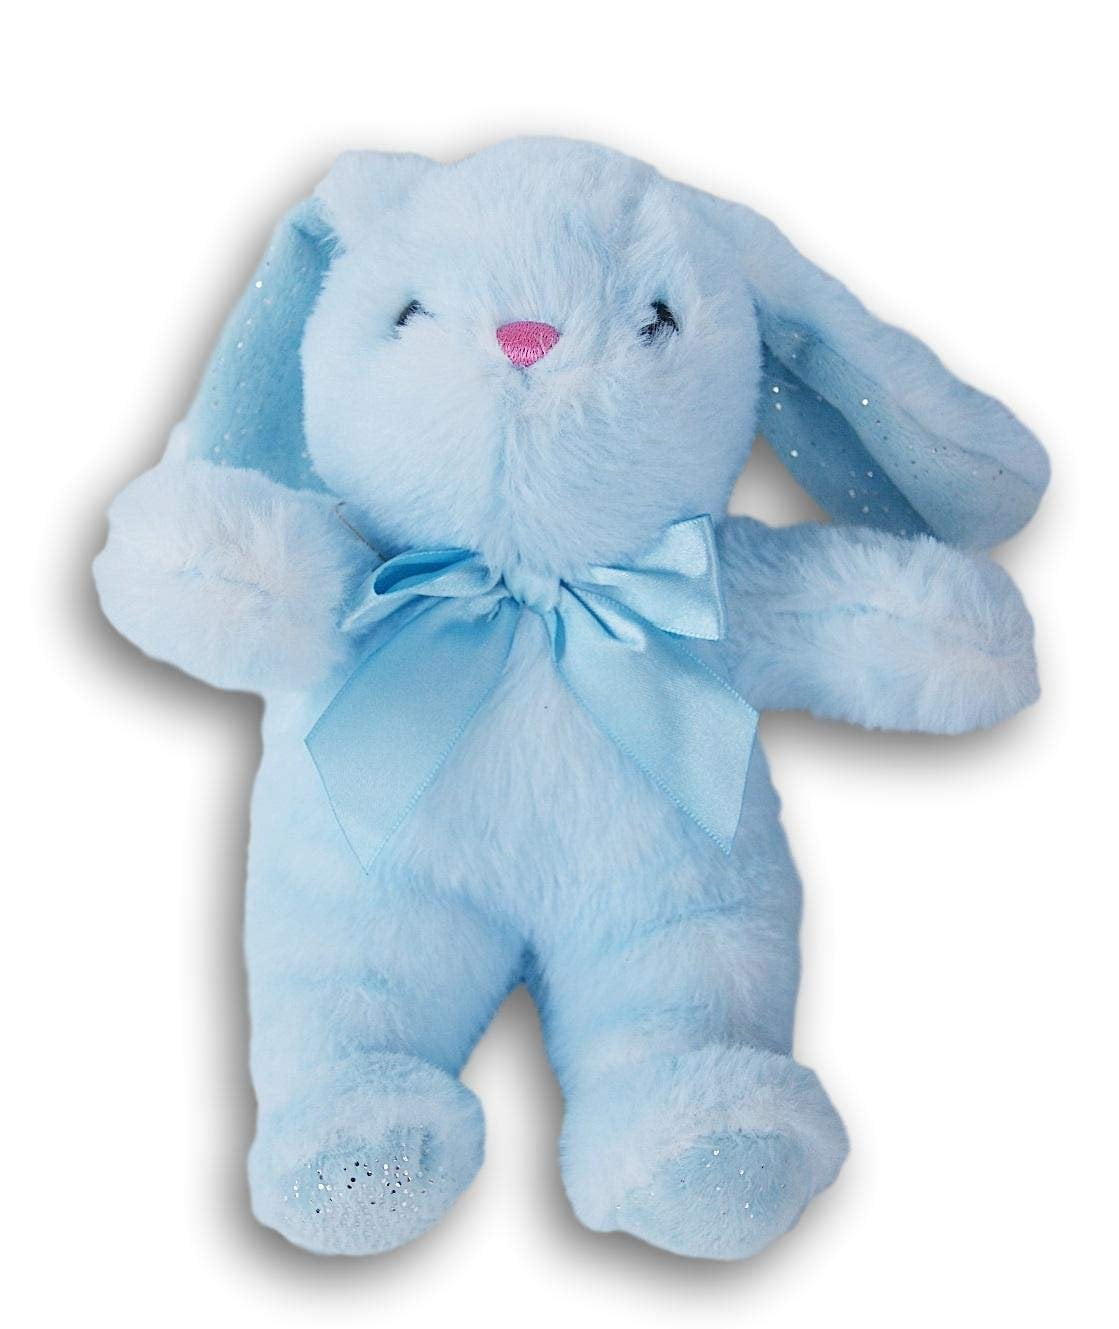 … Gray Stuffed Animals Bunny Plush Super Soft with Bow Tie 12 Inches Tall 